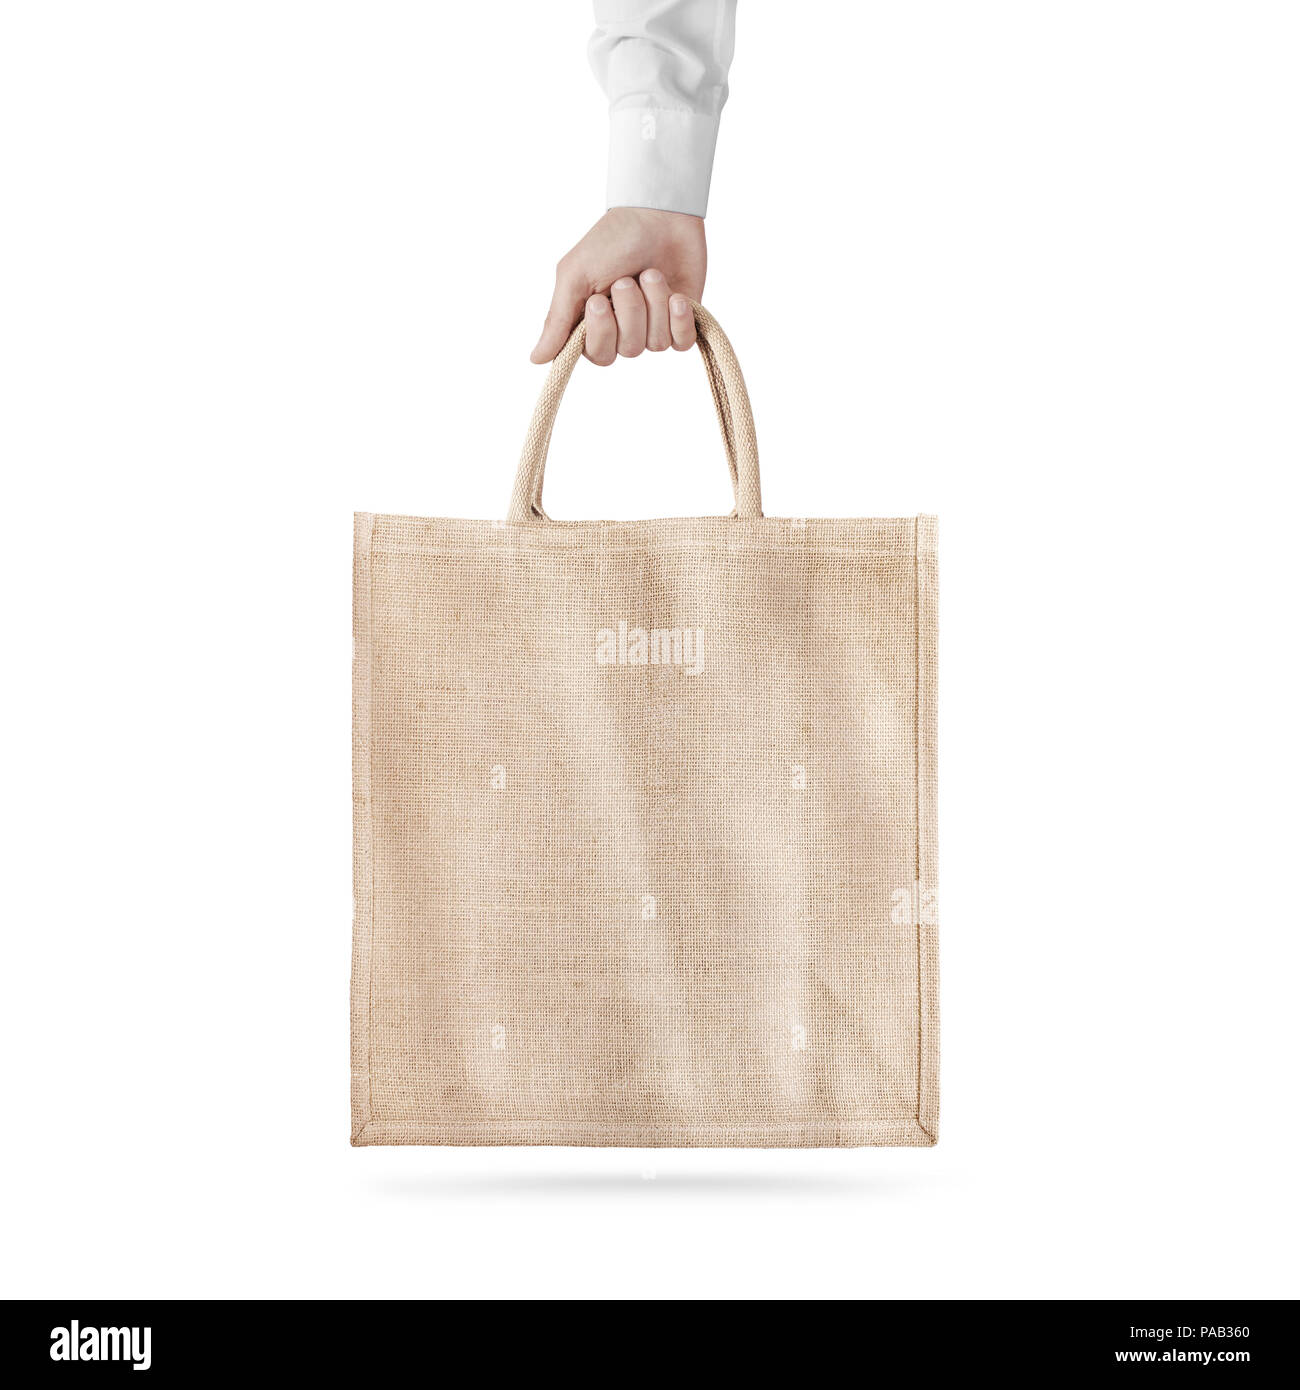 Download Blank Cotton Eco Bag Design Mockup Isolated Holding Hand Clipping Path Textile Cloth Bag Mock Up Template Hold Arm Tote Shoe Consumer Reusable Org Stock Photo Alamy